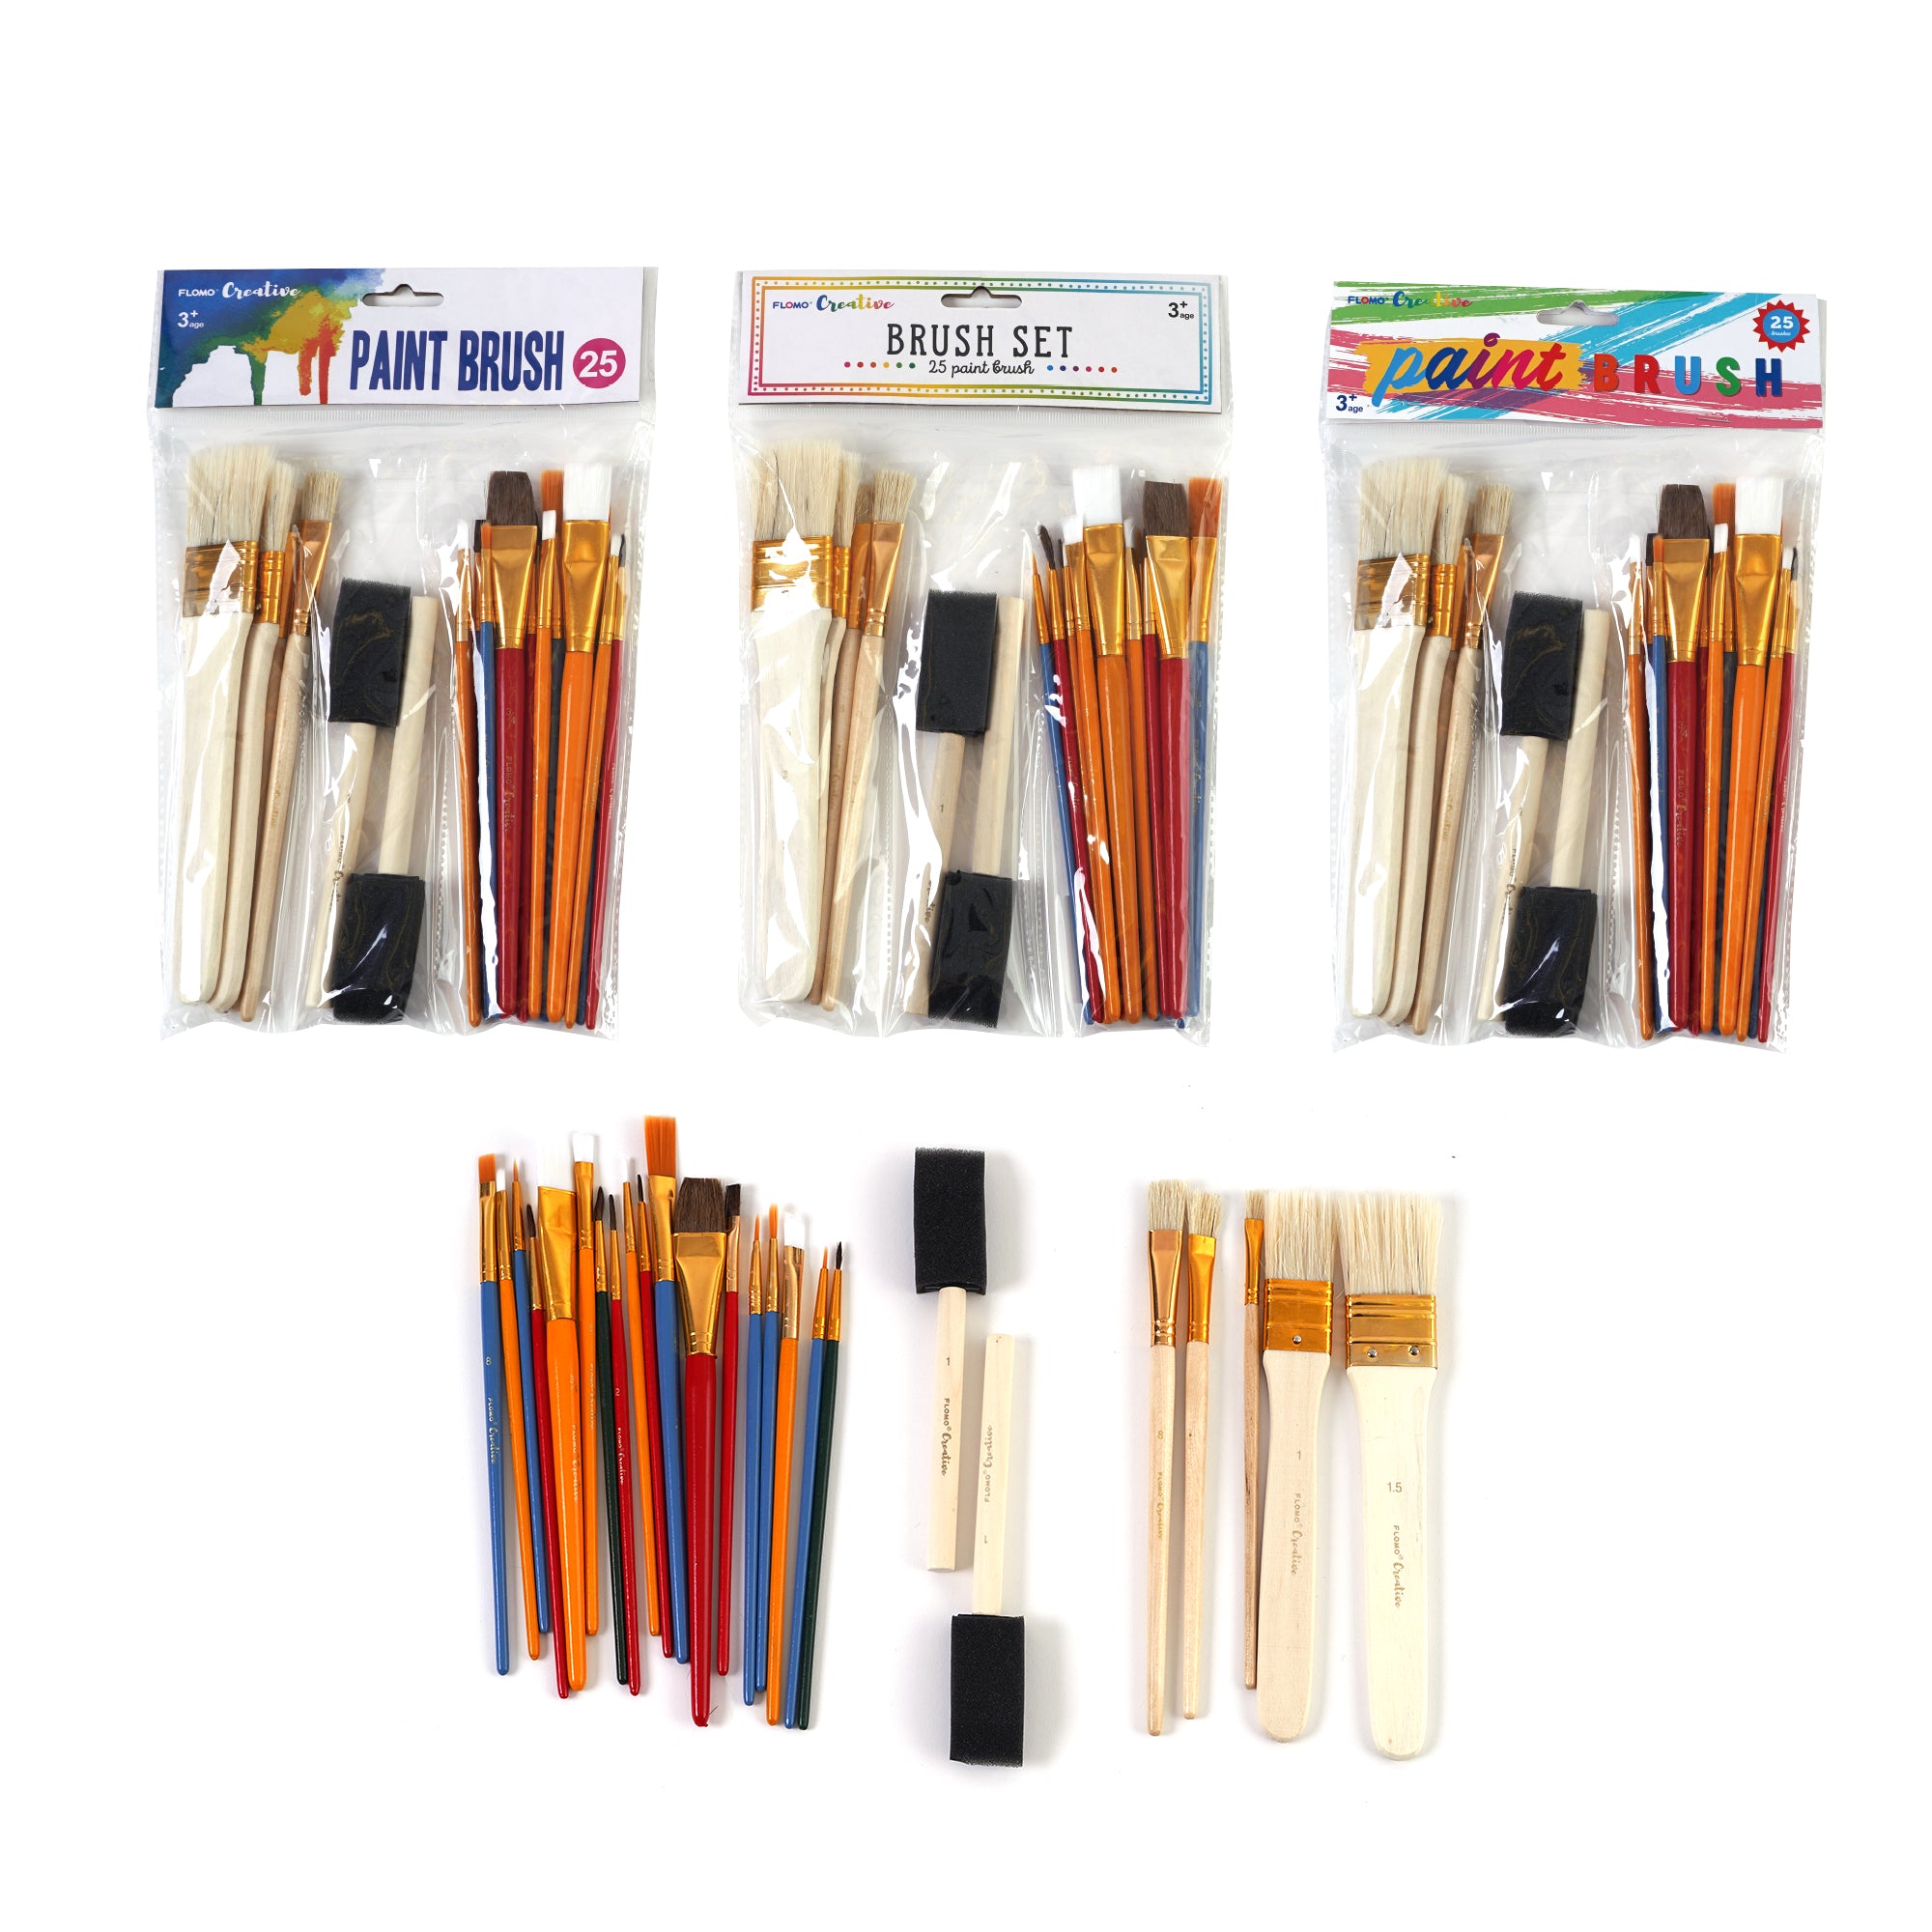 15 ASSORTED PLASTIC PAINT BRUSHES FOR KIDS CHILDREN ART AND CRAFT colorful